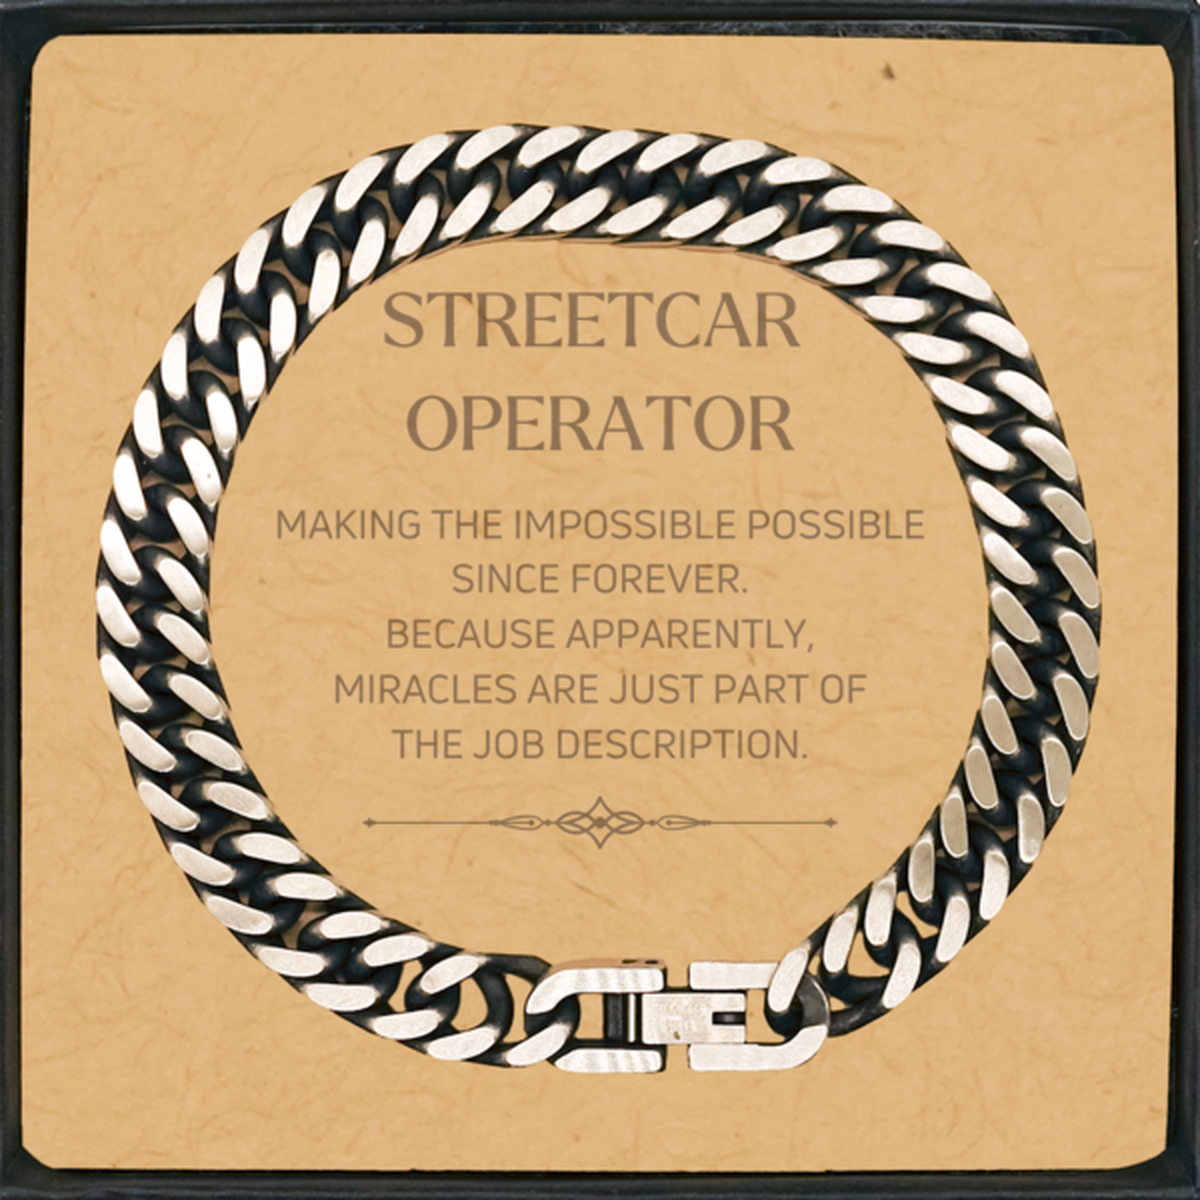 Funny Streetcar Operator Gifts, Miracles are just part of the job description, Inspirational Birthday Cuban Link Chain Bracelet For Streetcar Operator, Men, Women, Coworkers, Friends, Boss